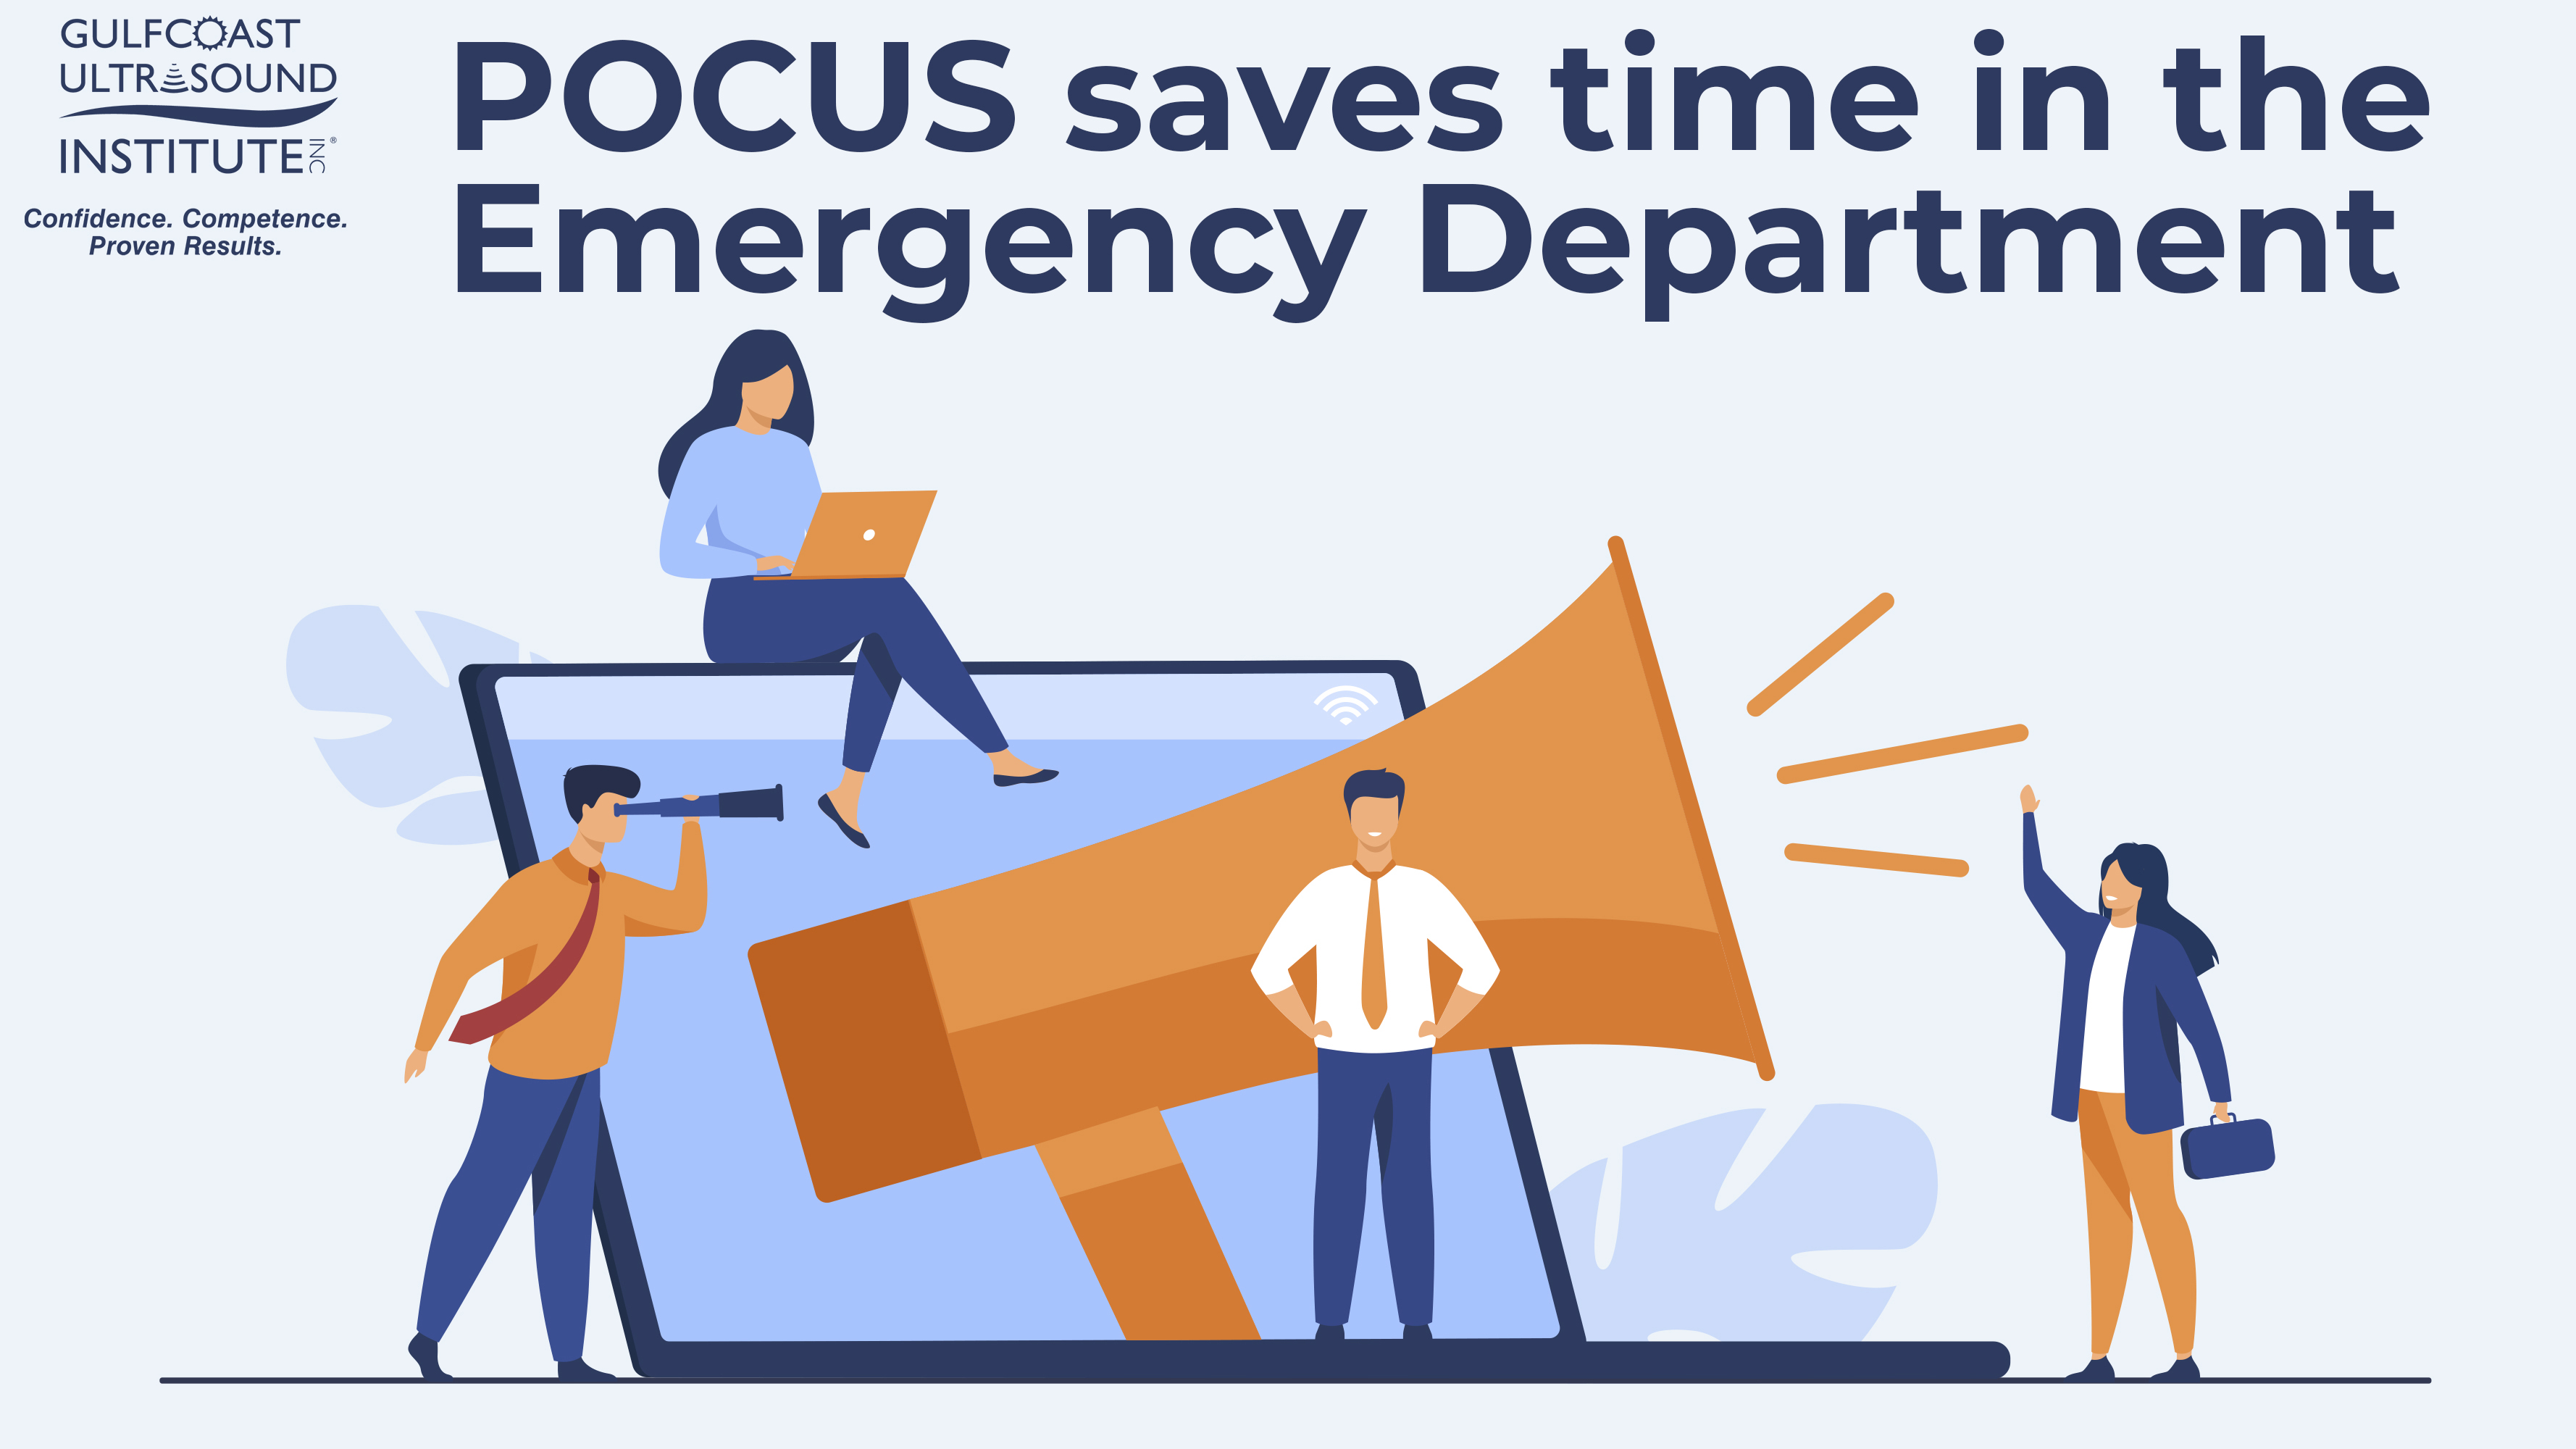 <strong><h1>POCUS saves time in the Emergency Department</strong></h1>